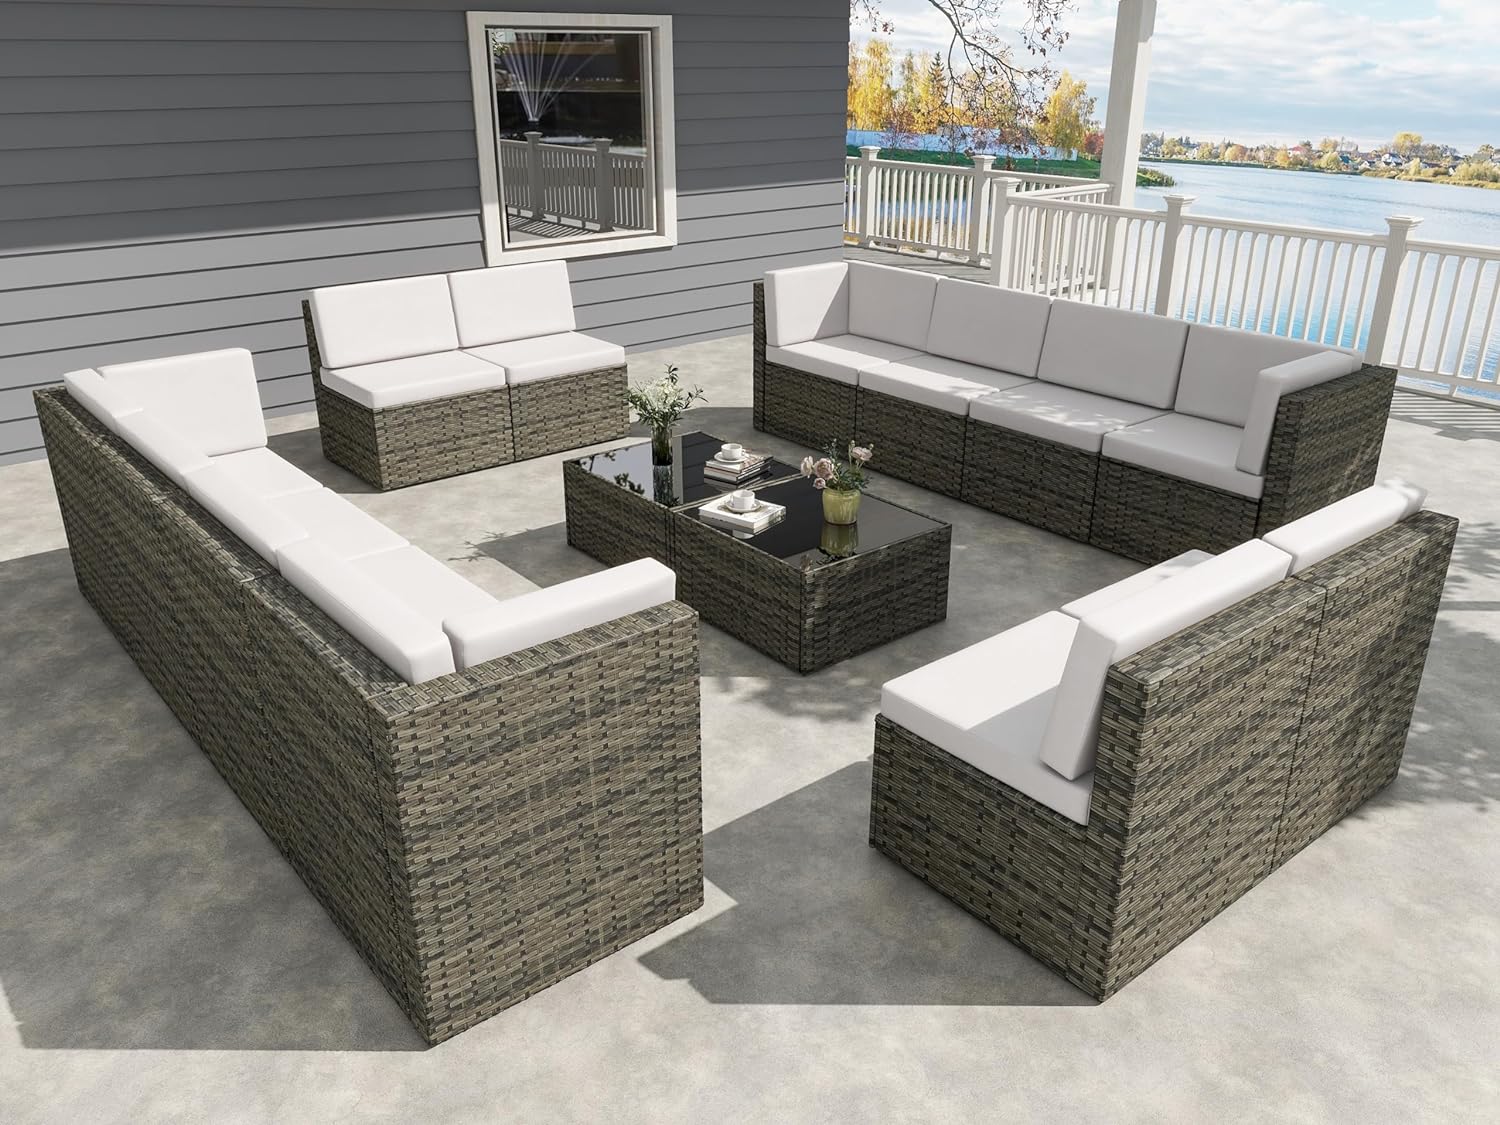 UIXE 14 Pieces Patio Furniture Sets Outdoor Sectional Sofa, All Weather PE Rattan Lounge Seating Couch Backyard Wicker Modular Chairs Conversation Set with 12 Person Seats Group, Light Gray